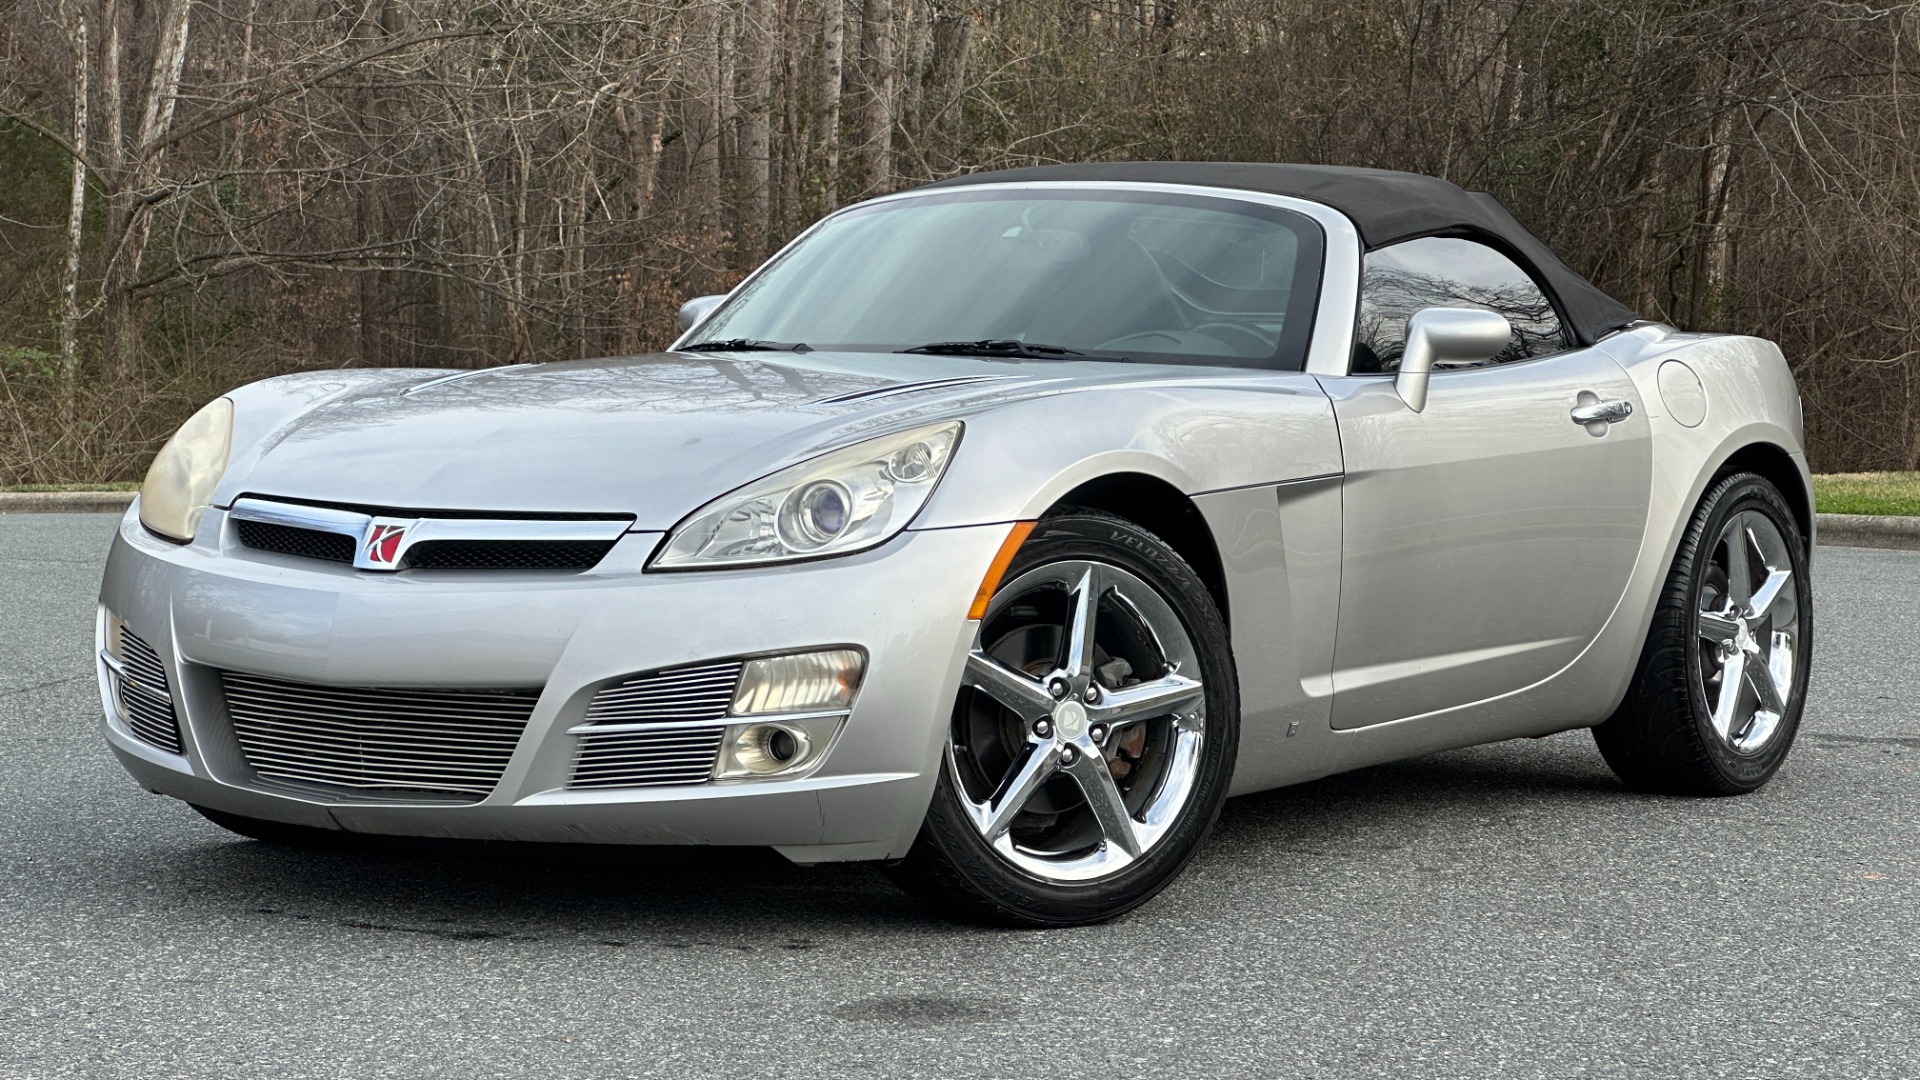 Used 2008 Saturn Sky CONVERTIBLE / MONSOON AUDIO / AUTOMATIC / PREMIUM TRIM / SPOILER for sale Sold at Formula Imports in Charlotte NC 28227 2